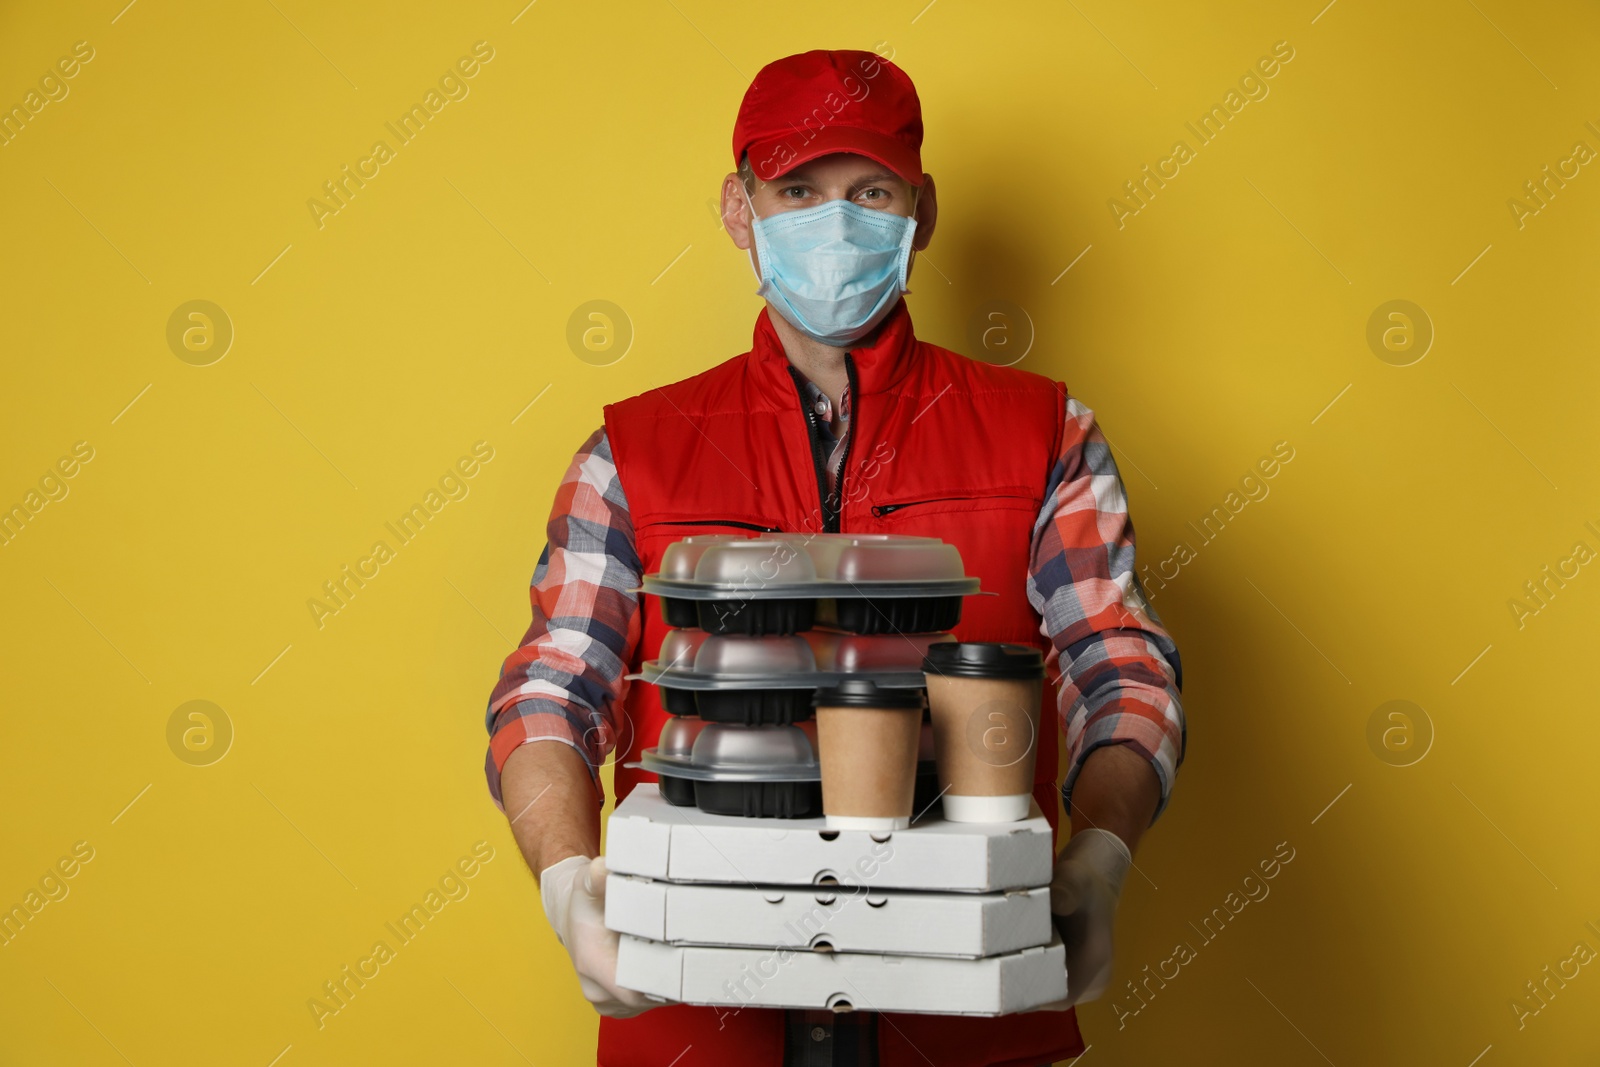 Photo of Courier in protective mask and gloves holding order on yellow background. Food delivery service during coronavirus quarantine